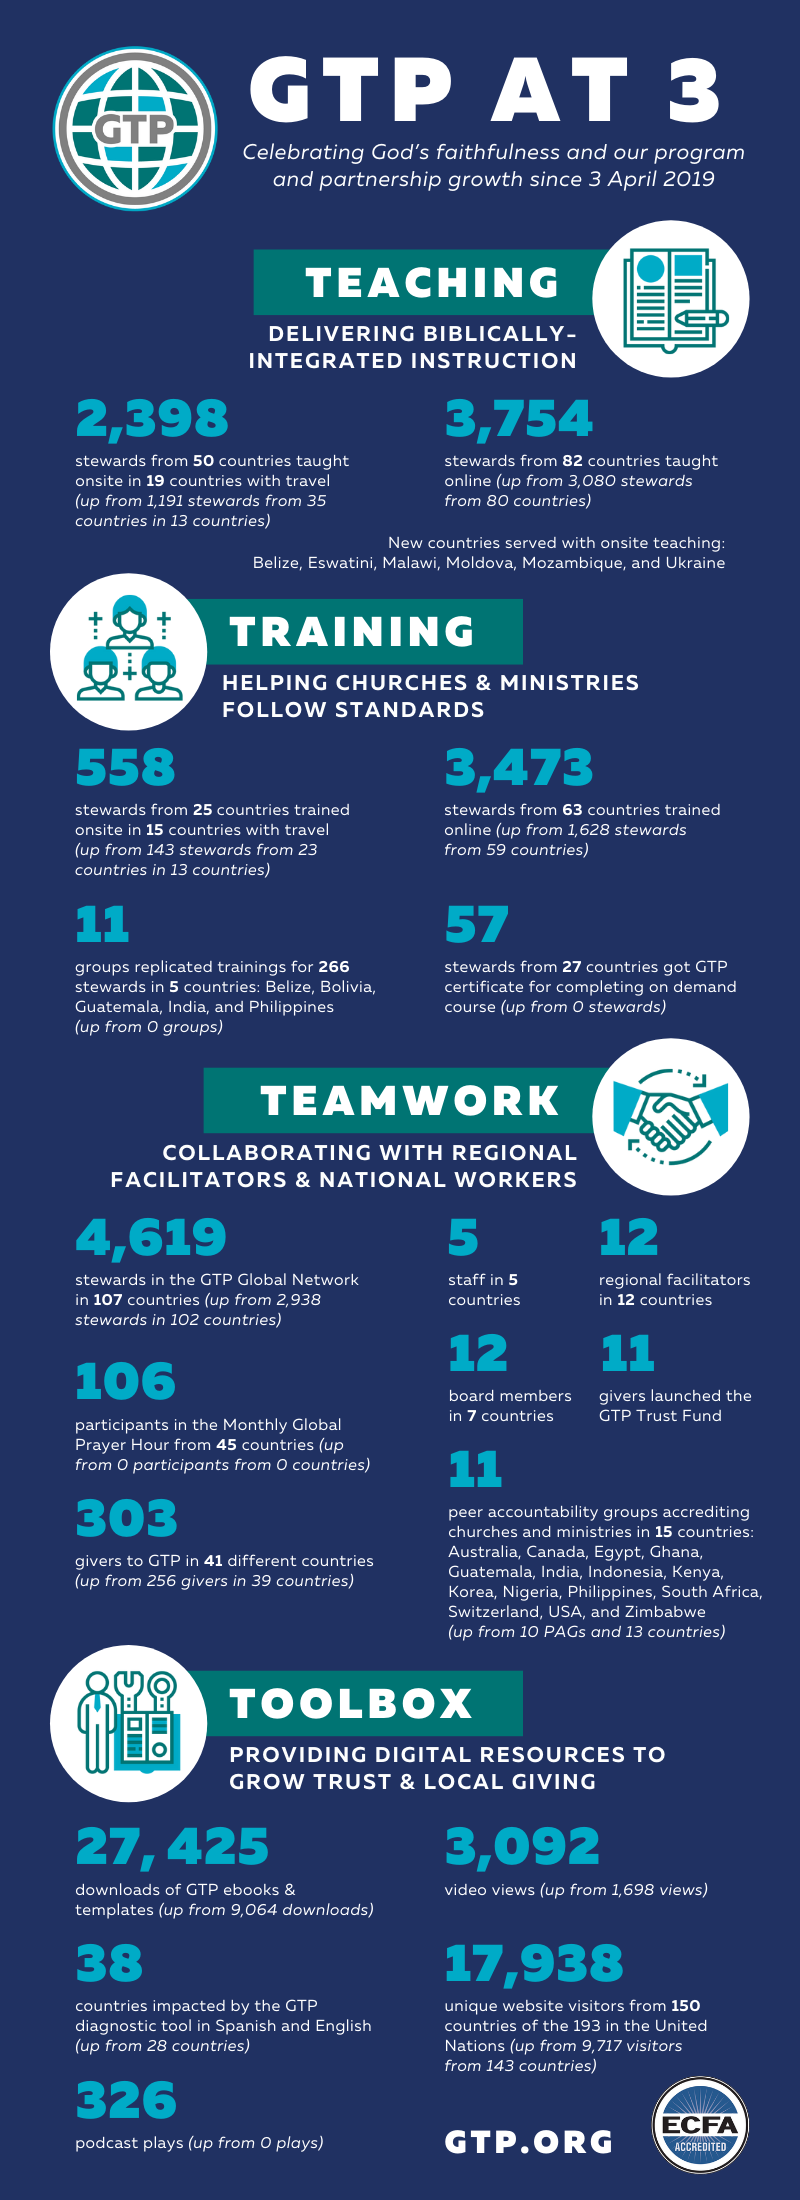 GTP at 3 infographic